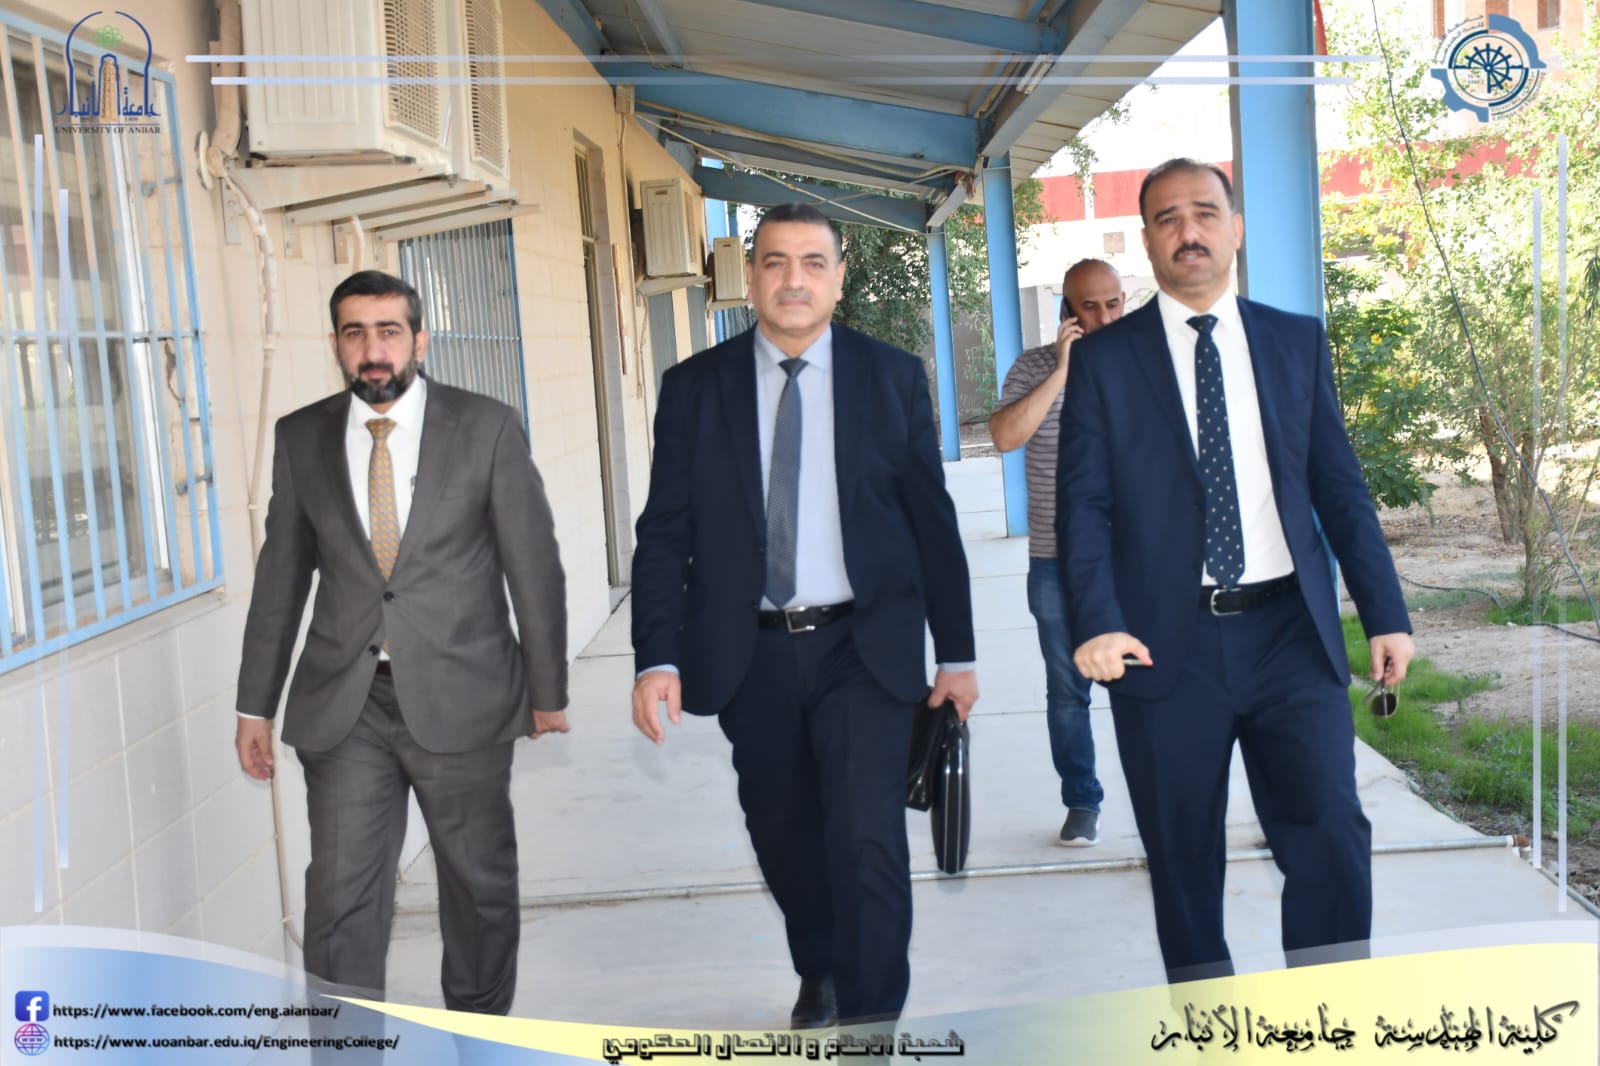 The College of Engineering receives a ministerial committee to evaluate the scientific and academic reality in the college